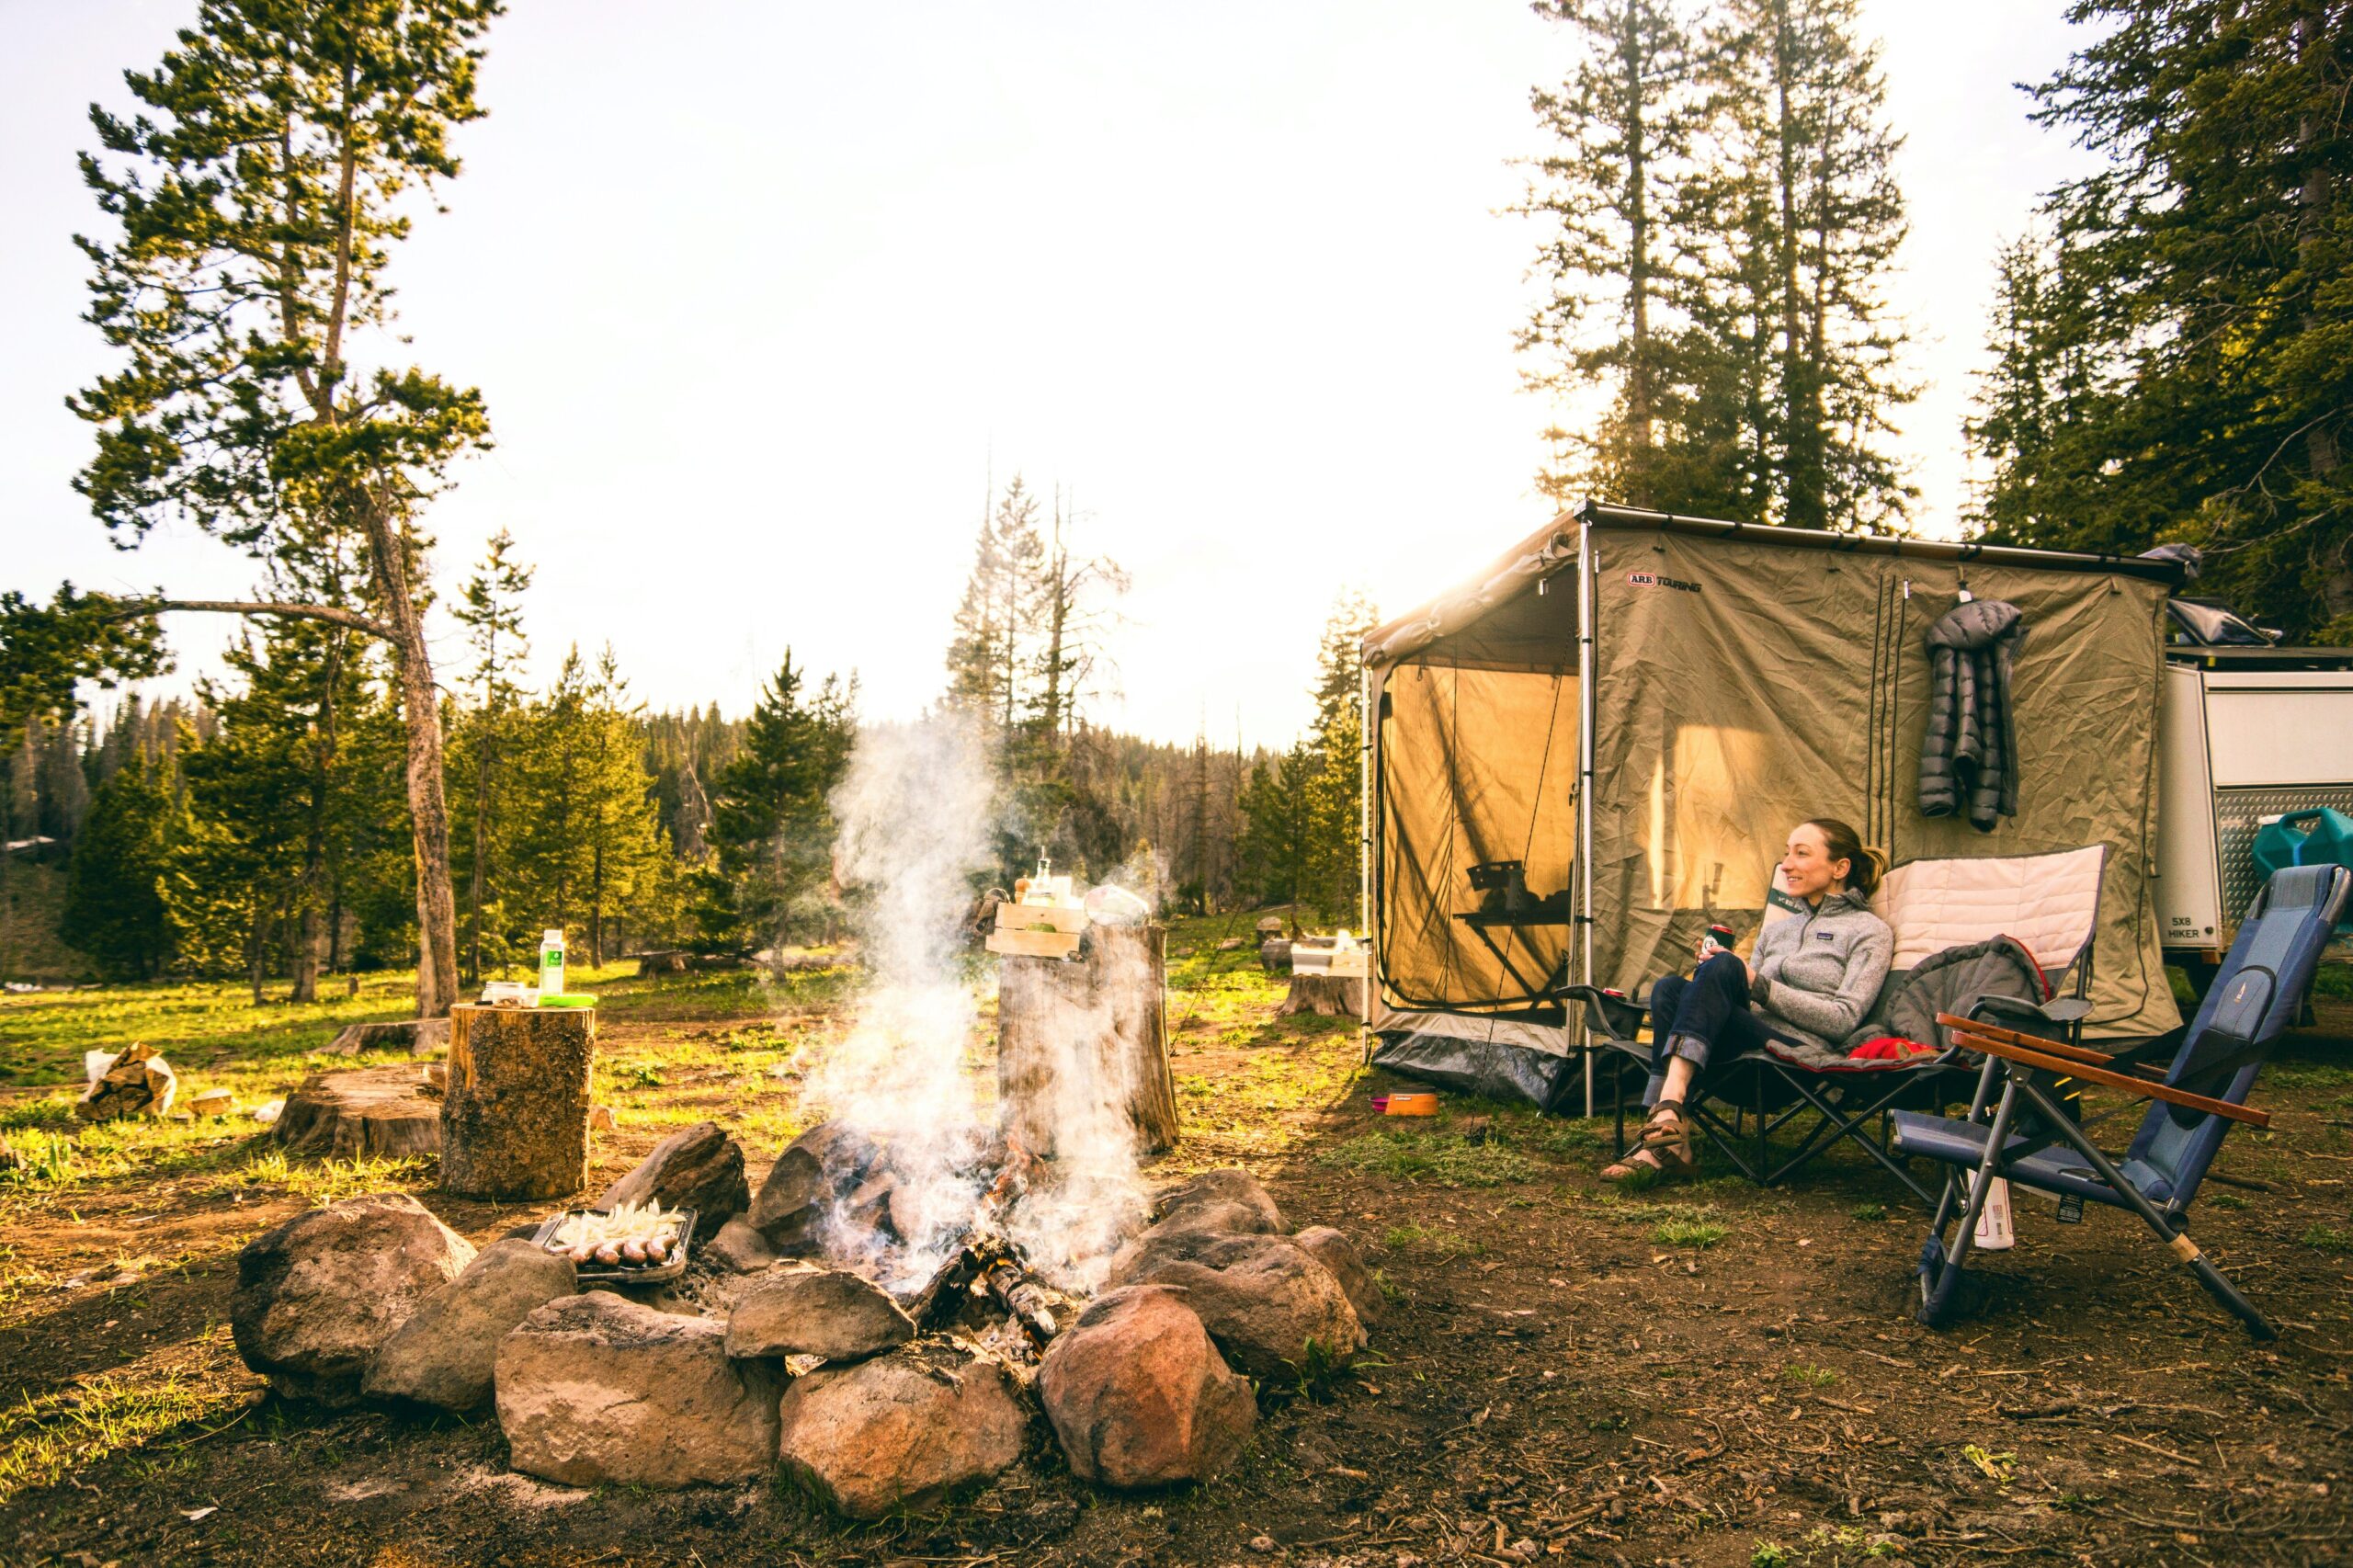 A campfire sits in the foreground, surrounded by small stones. A camper sits in a yellow tent in the background, not watching the fire. 